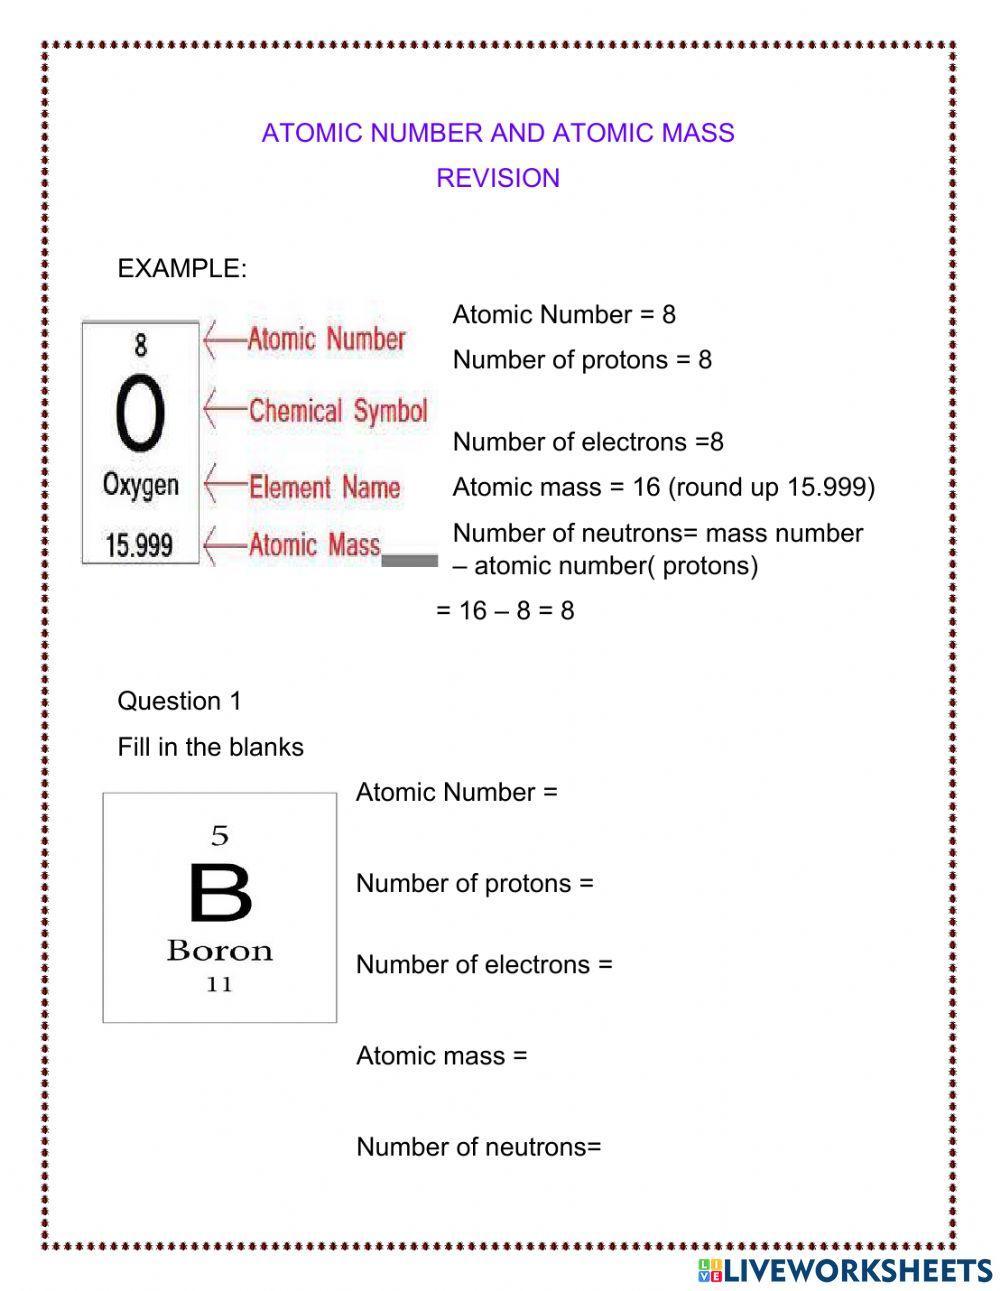 Atomic number, Mass number and Subatomic Particle